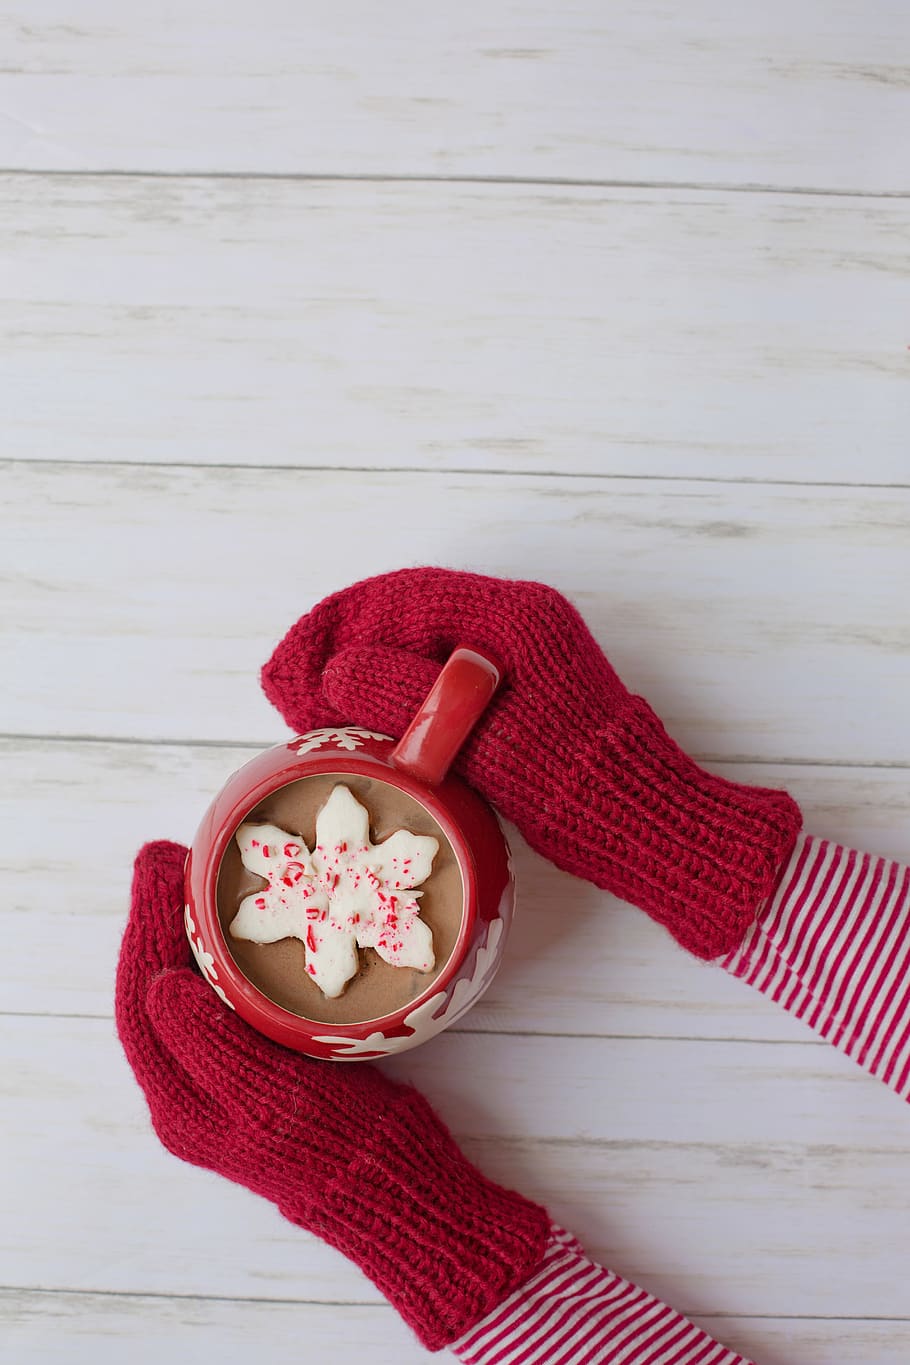 mittens, hot chocolate, red, winter, christmas, cozy, cosy, warm, border, text space